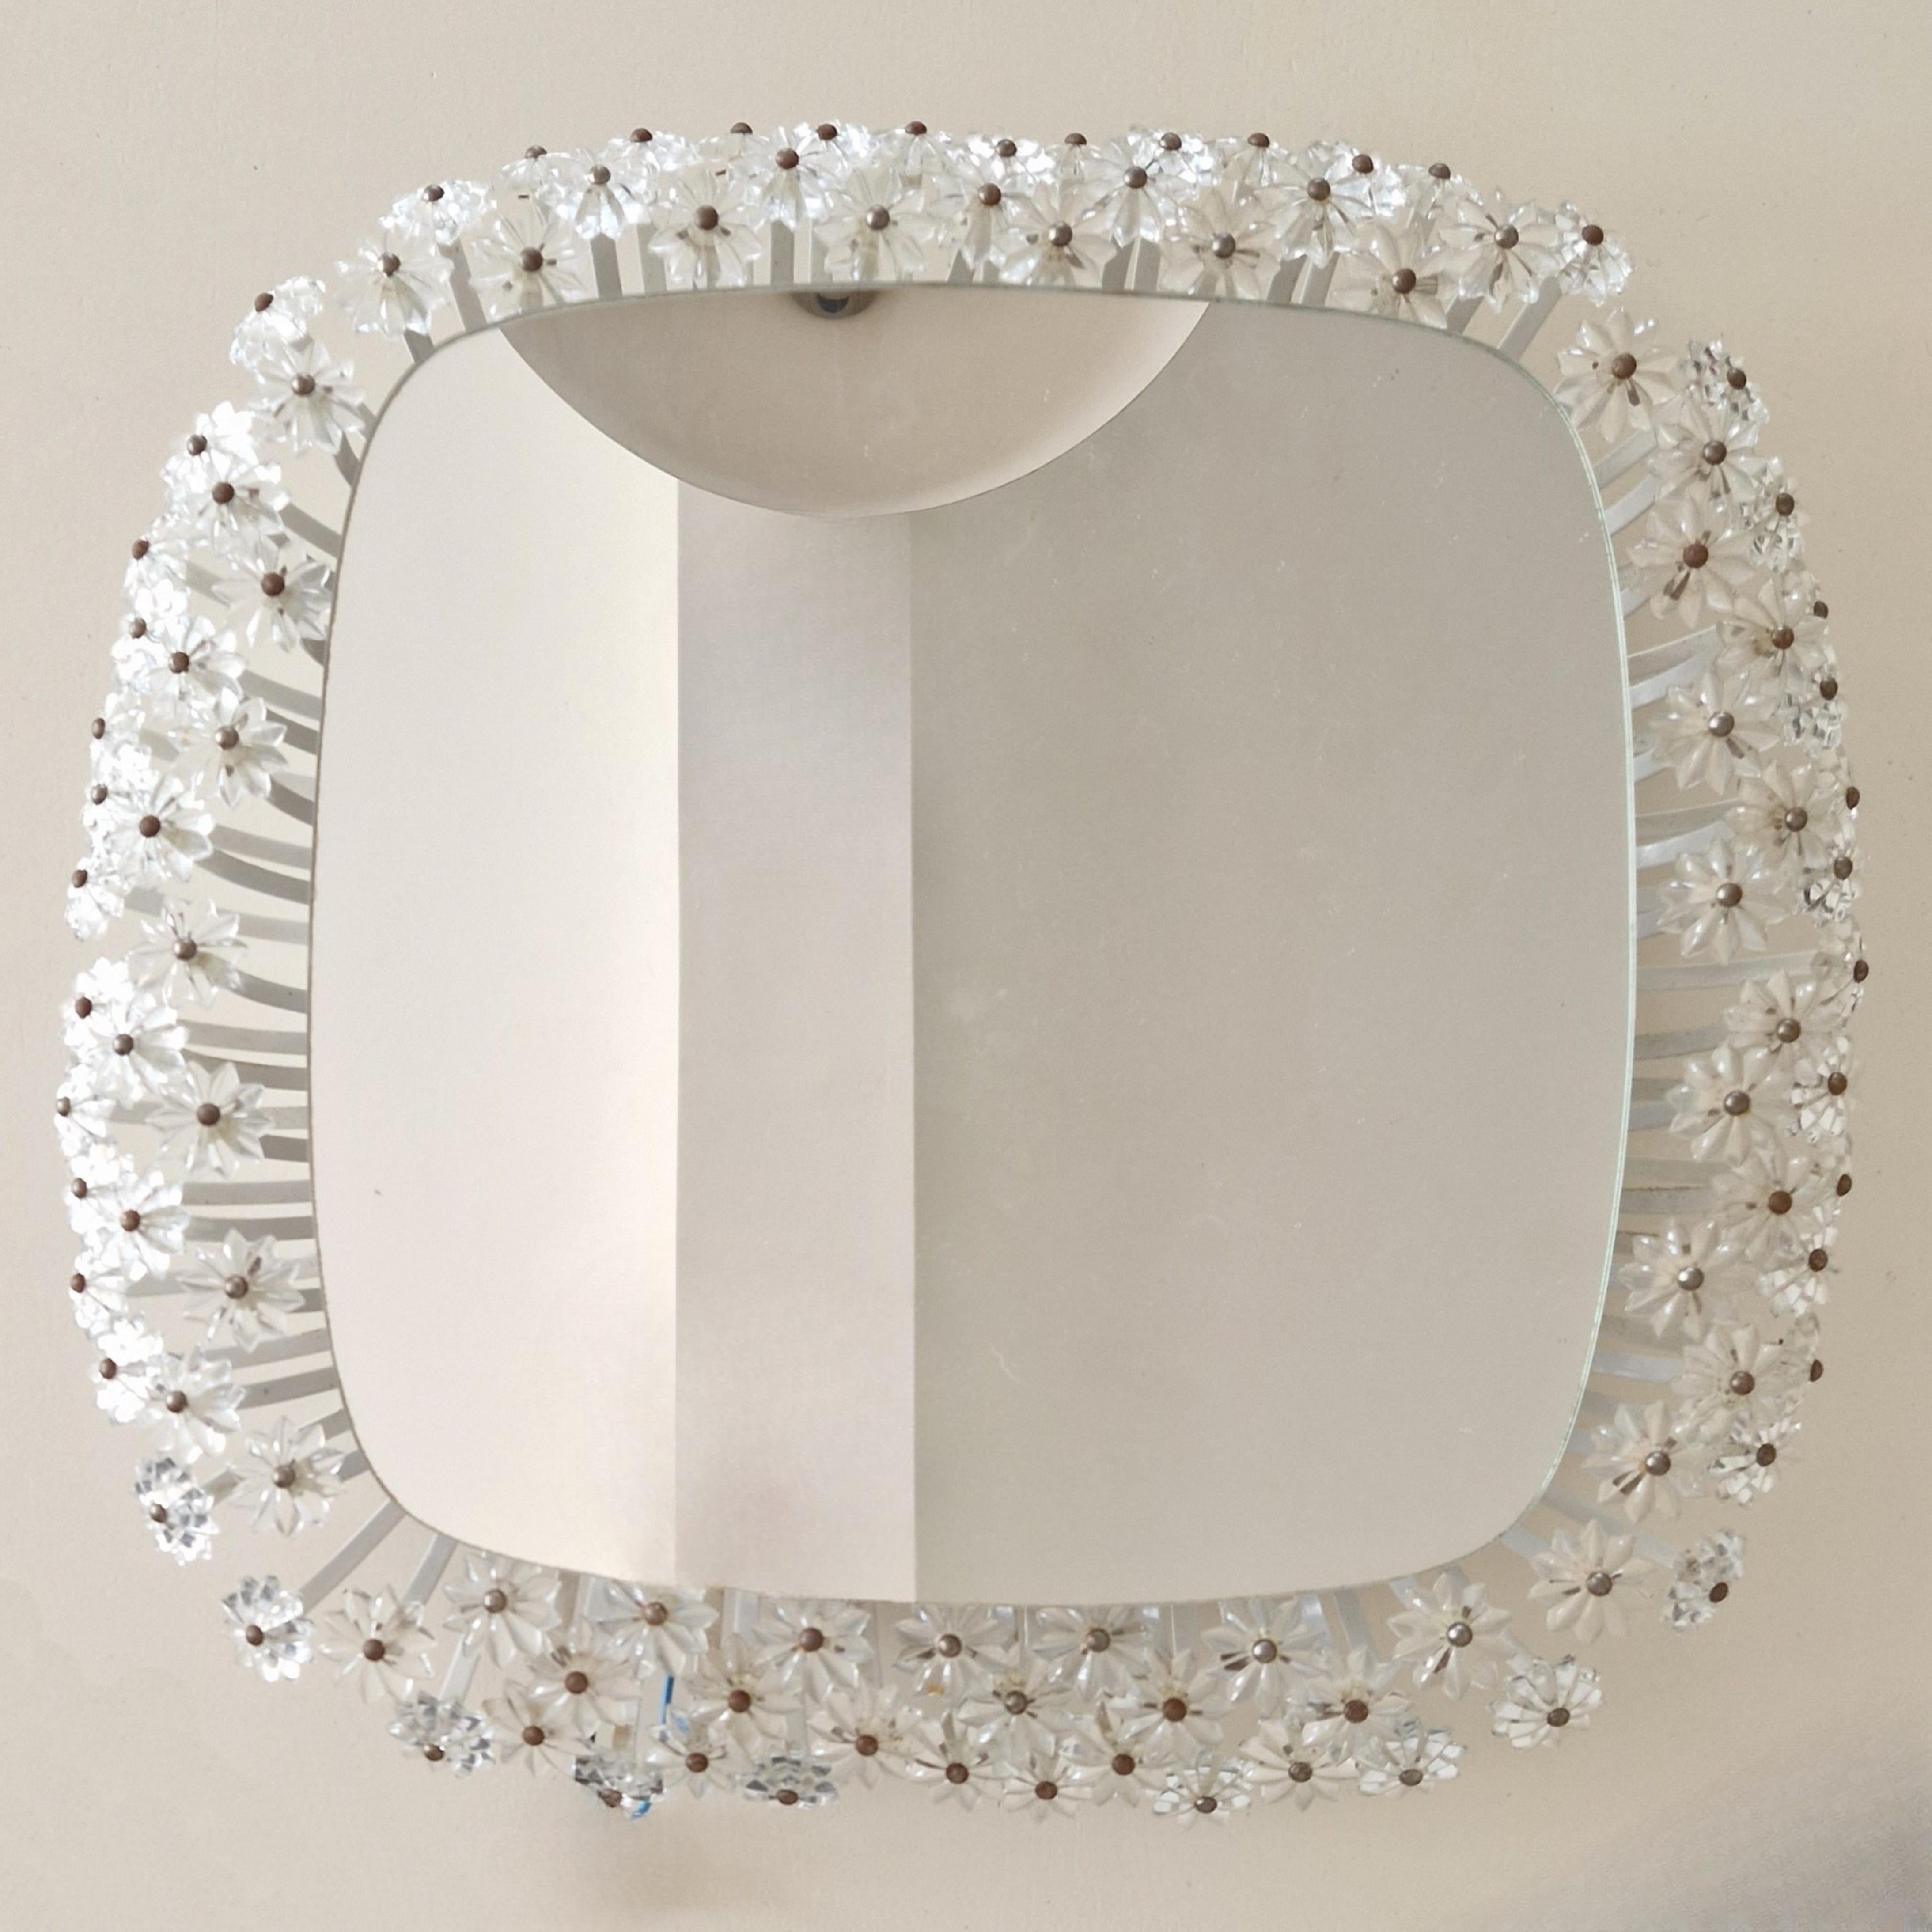 20th Century Illuminated floral mirror by Emil Stejnar for Rupert Nikoll, Austria 1950s For Sale